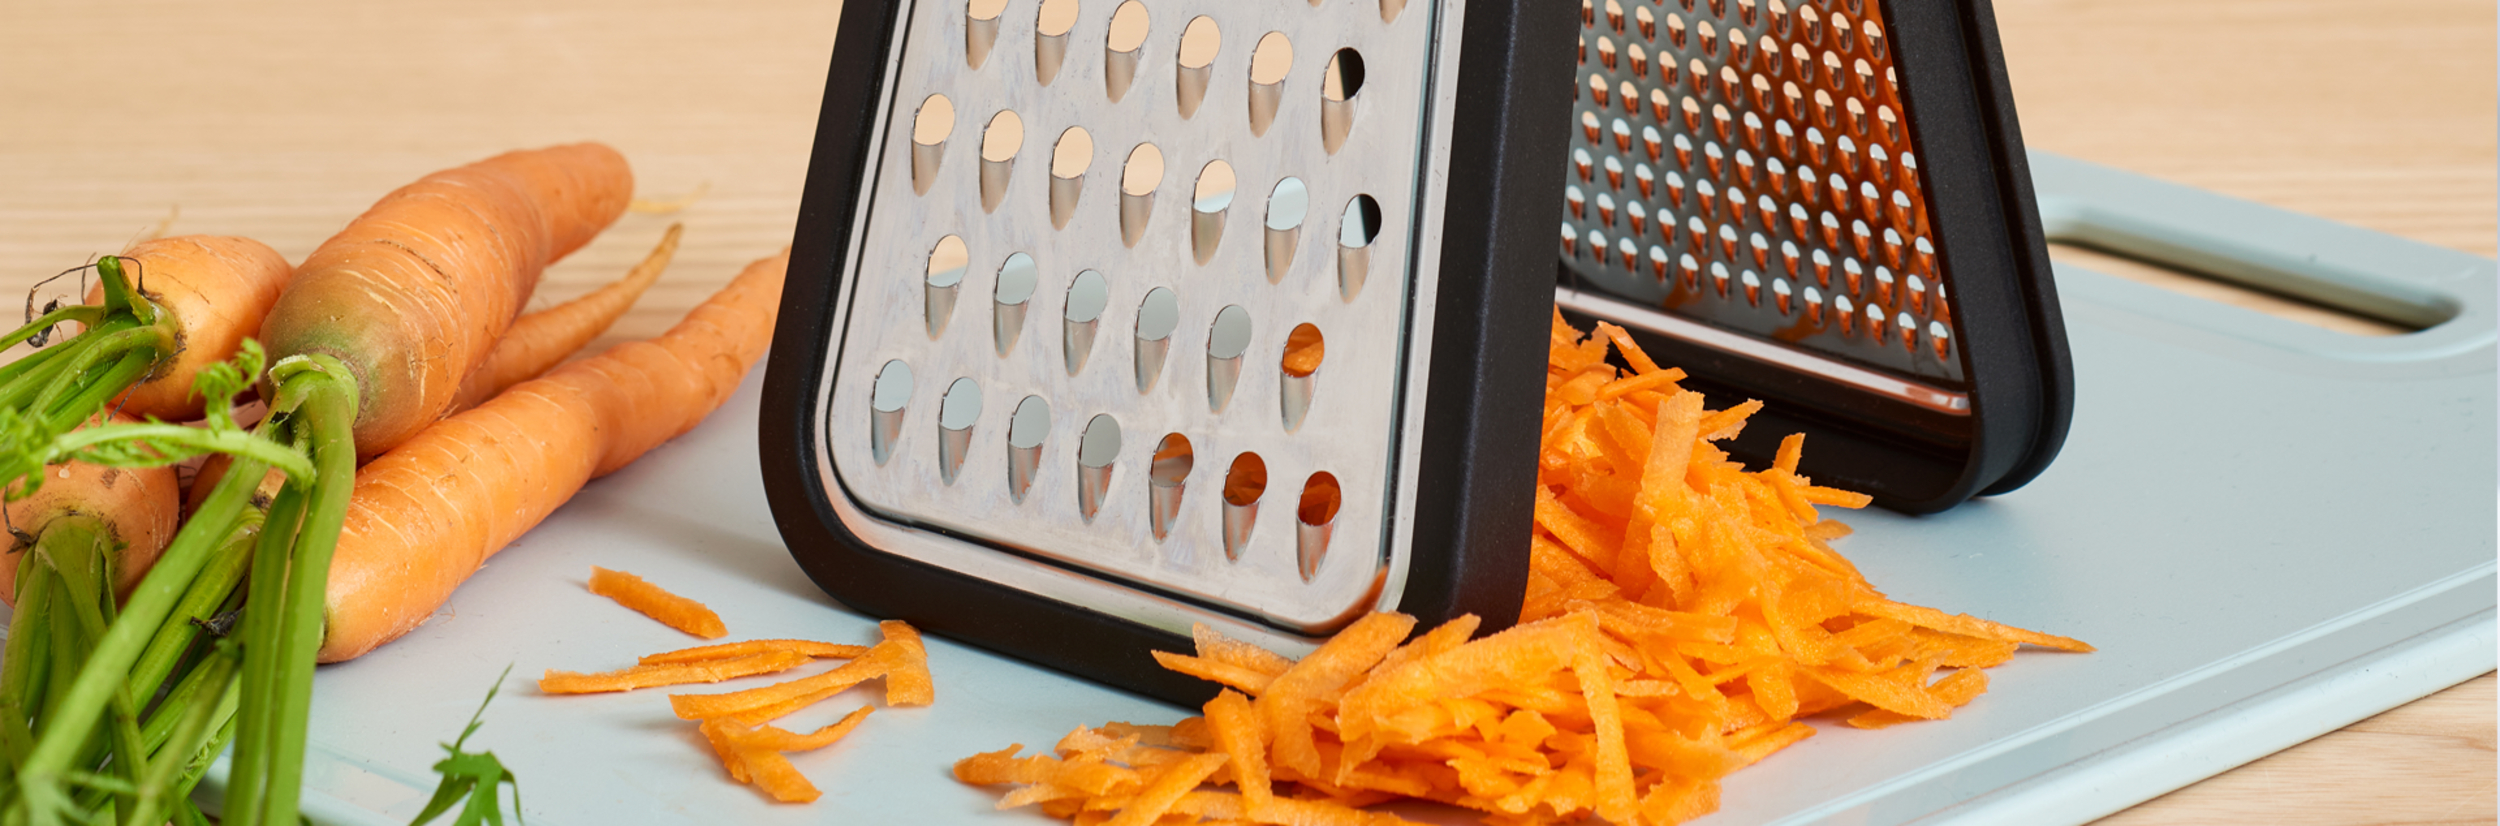 Graters & cheese slicers